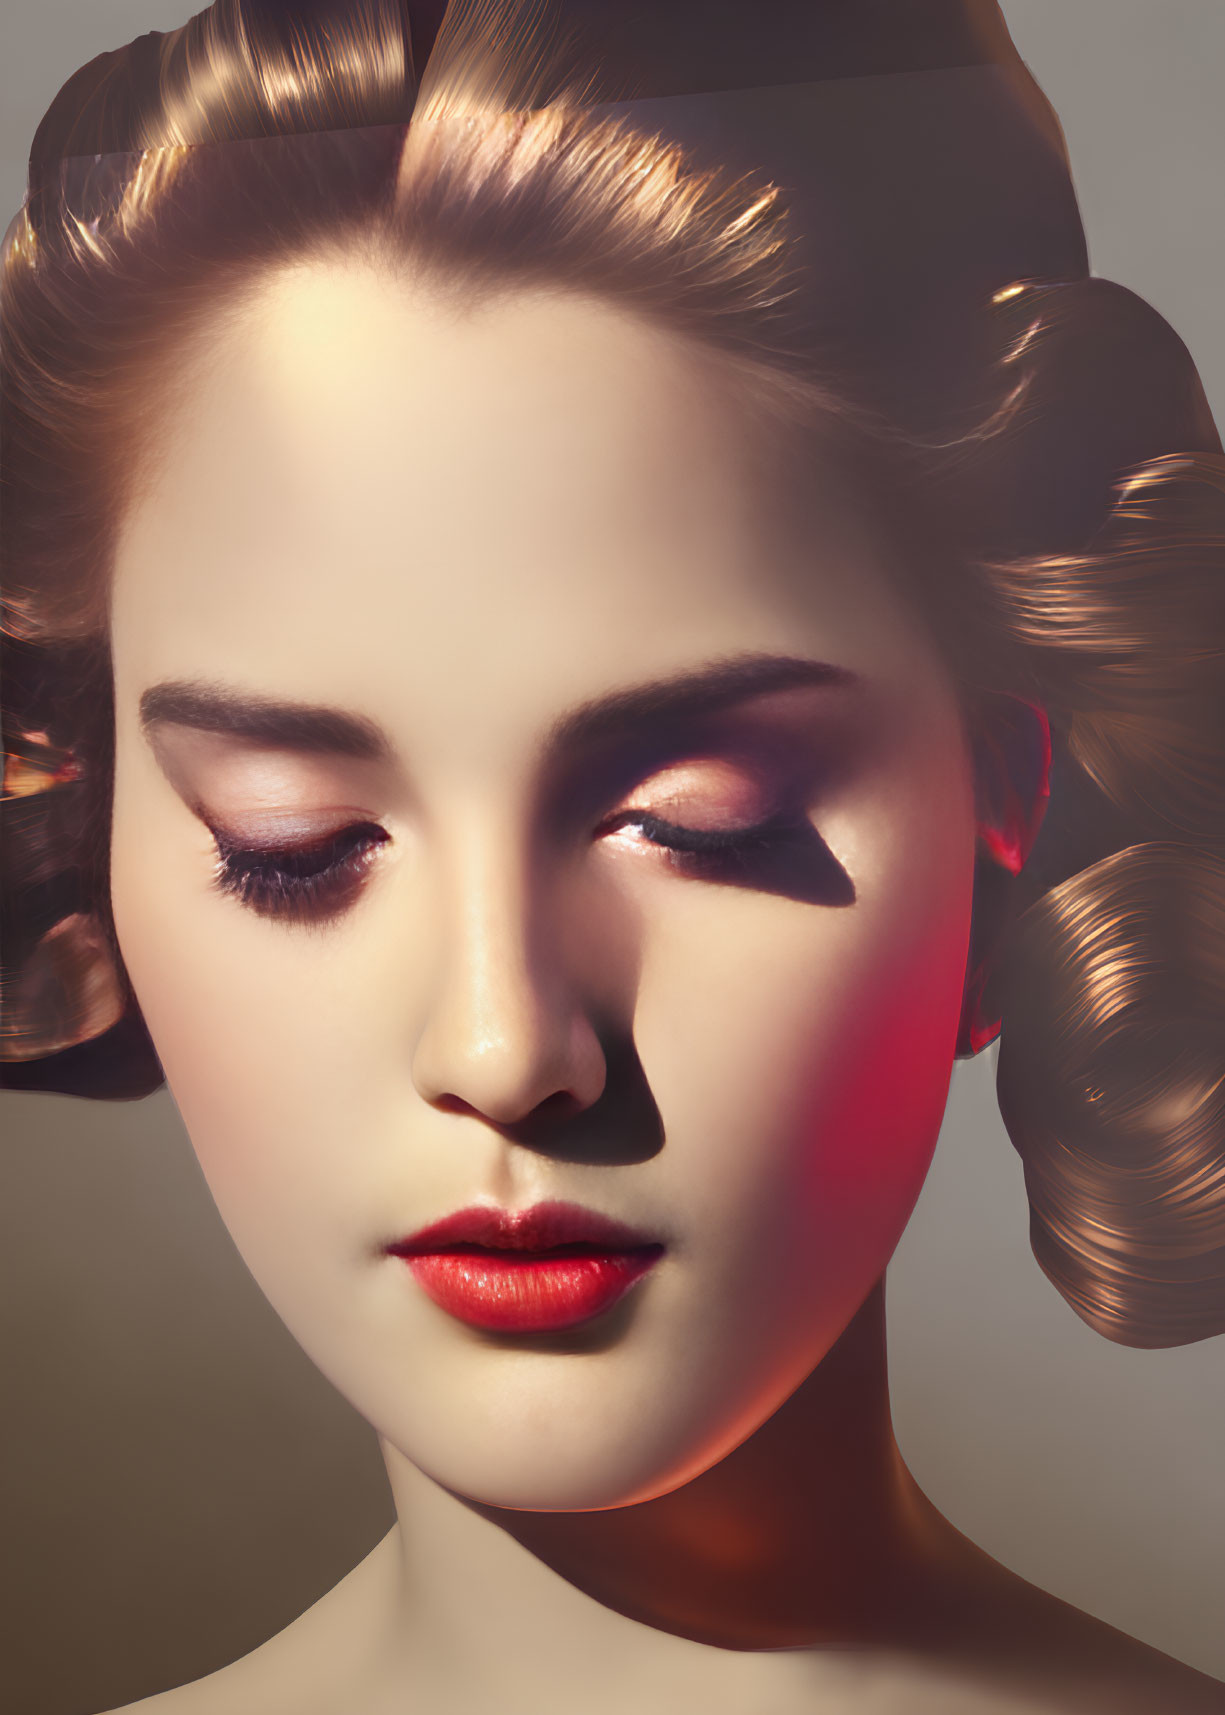 Portrait of woman with curled hair, subtle makeup, red lipstick, and serene expression.